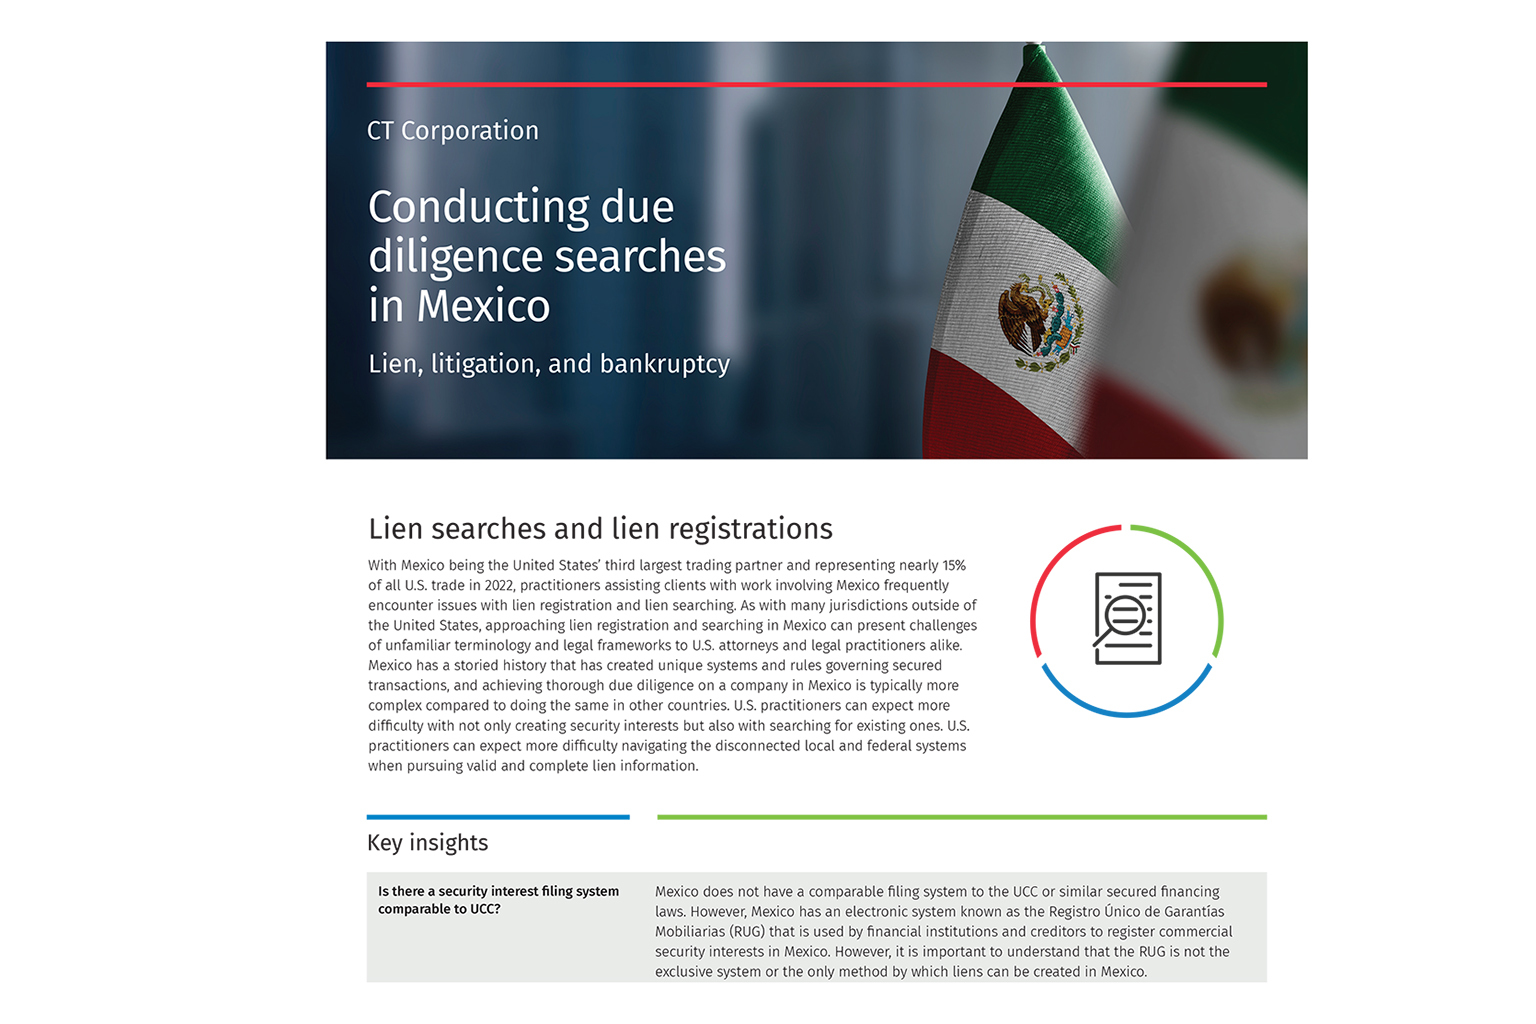 Mexico's due diligence considerations by CT Corporation